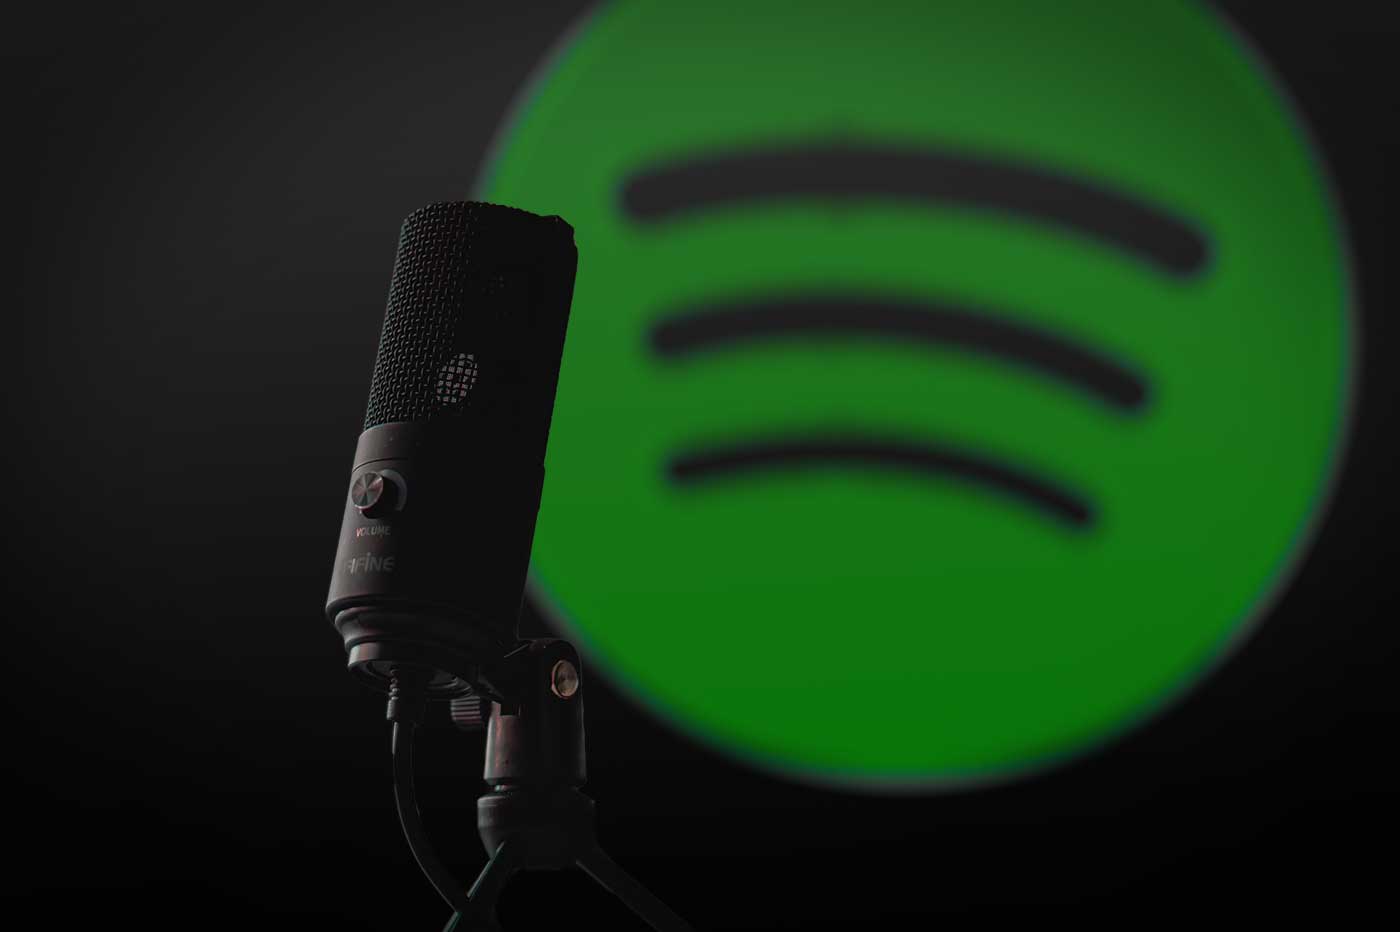 how-to-upload-a-podcast-to-spotify